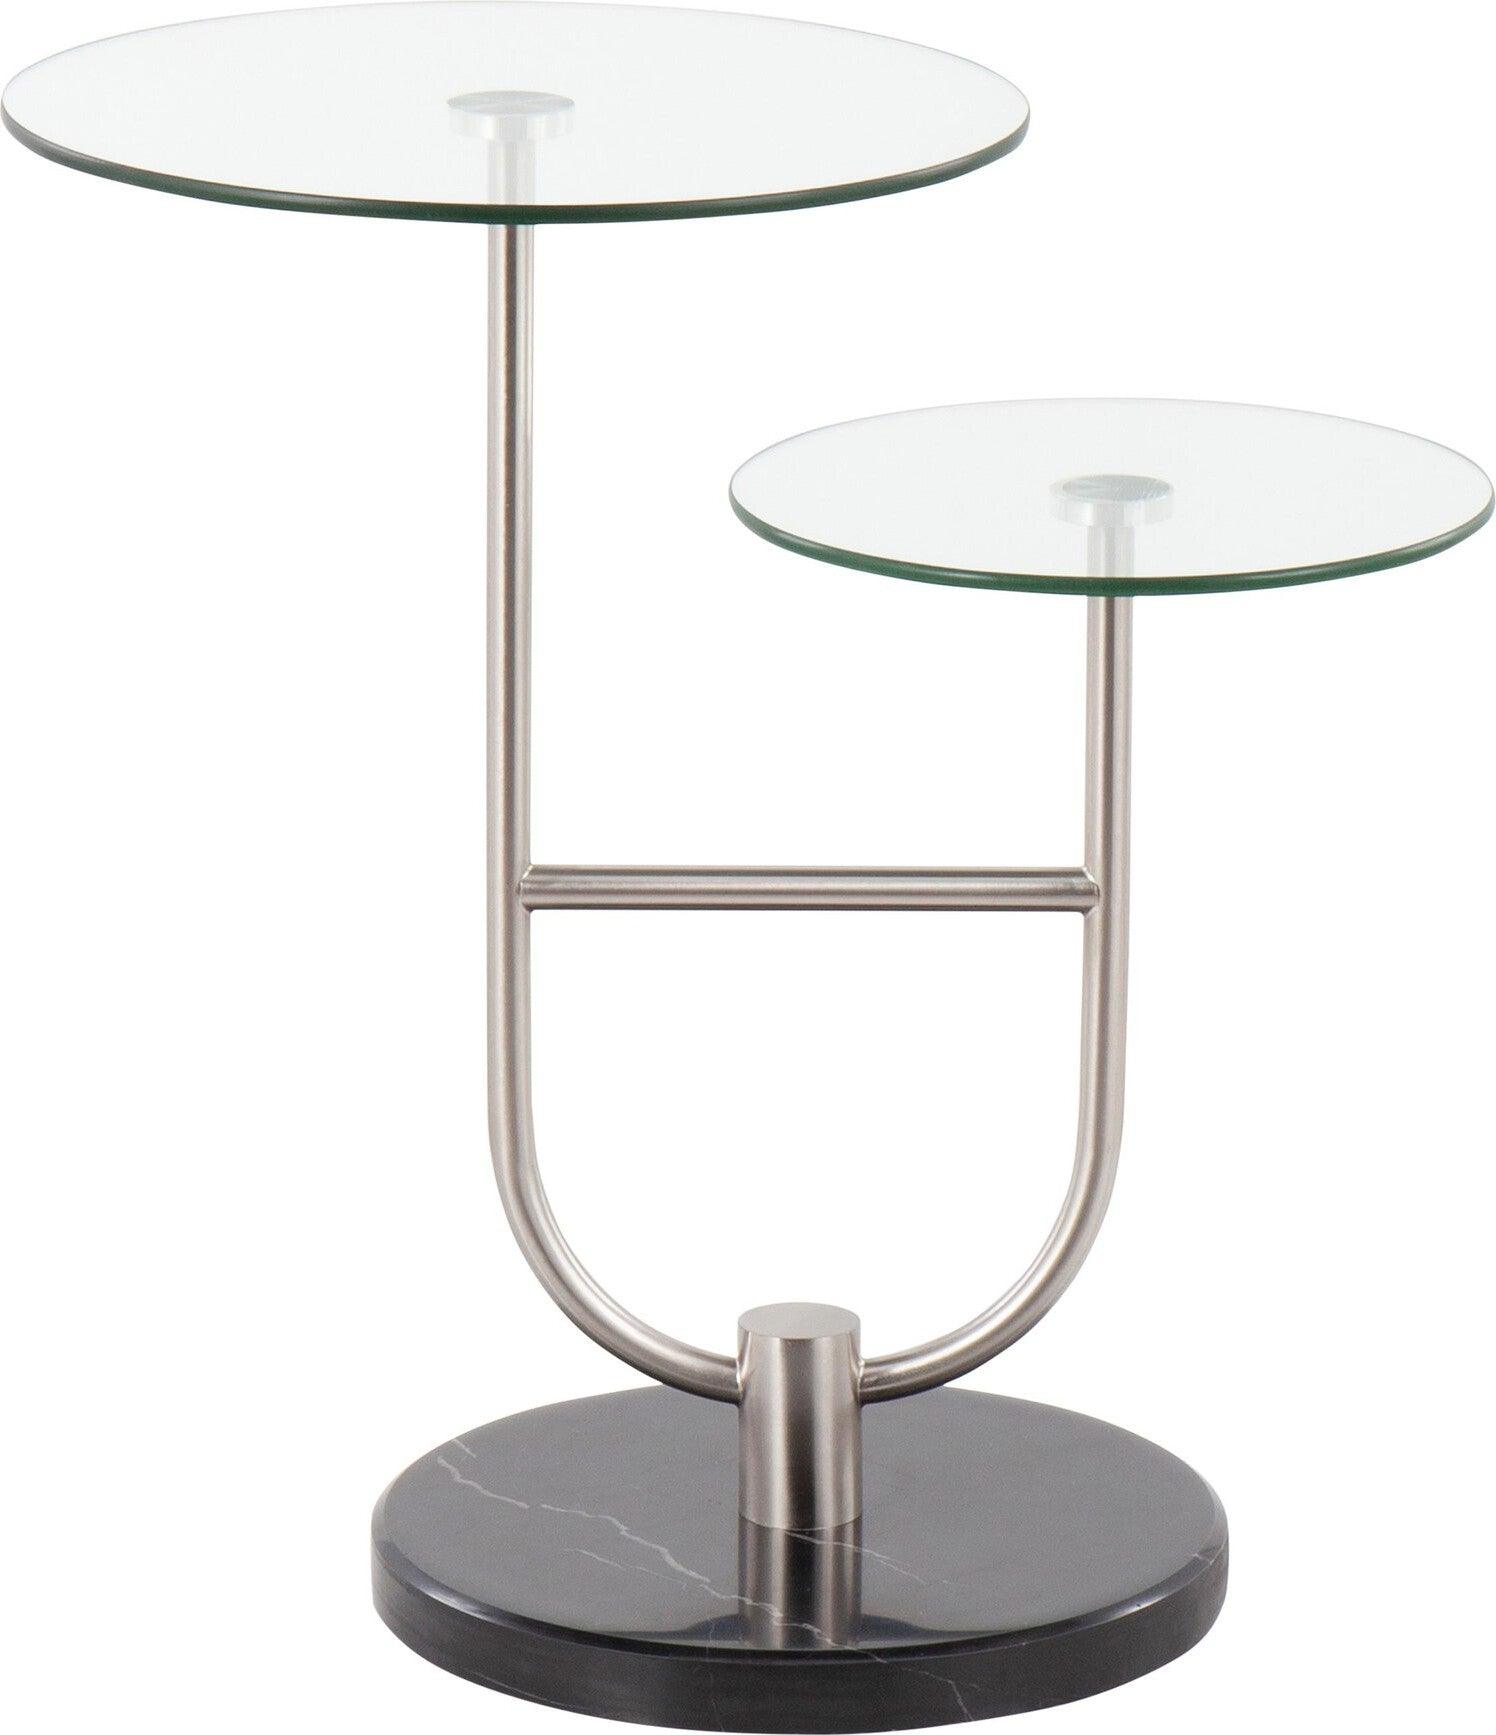 Lumisource Side & End Tables - Trombone Side Table Black Marble & Nickel